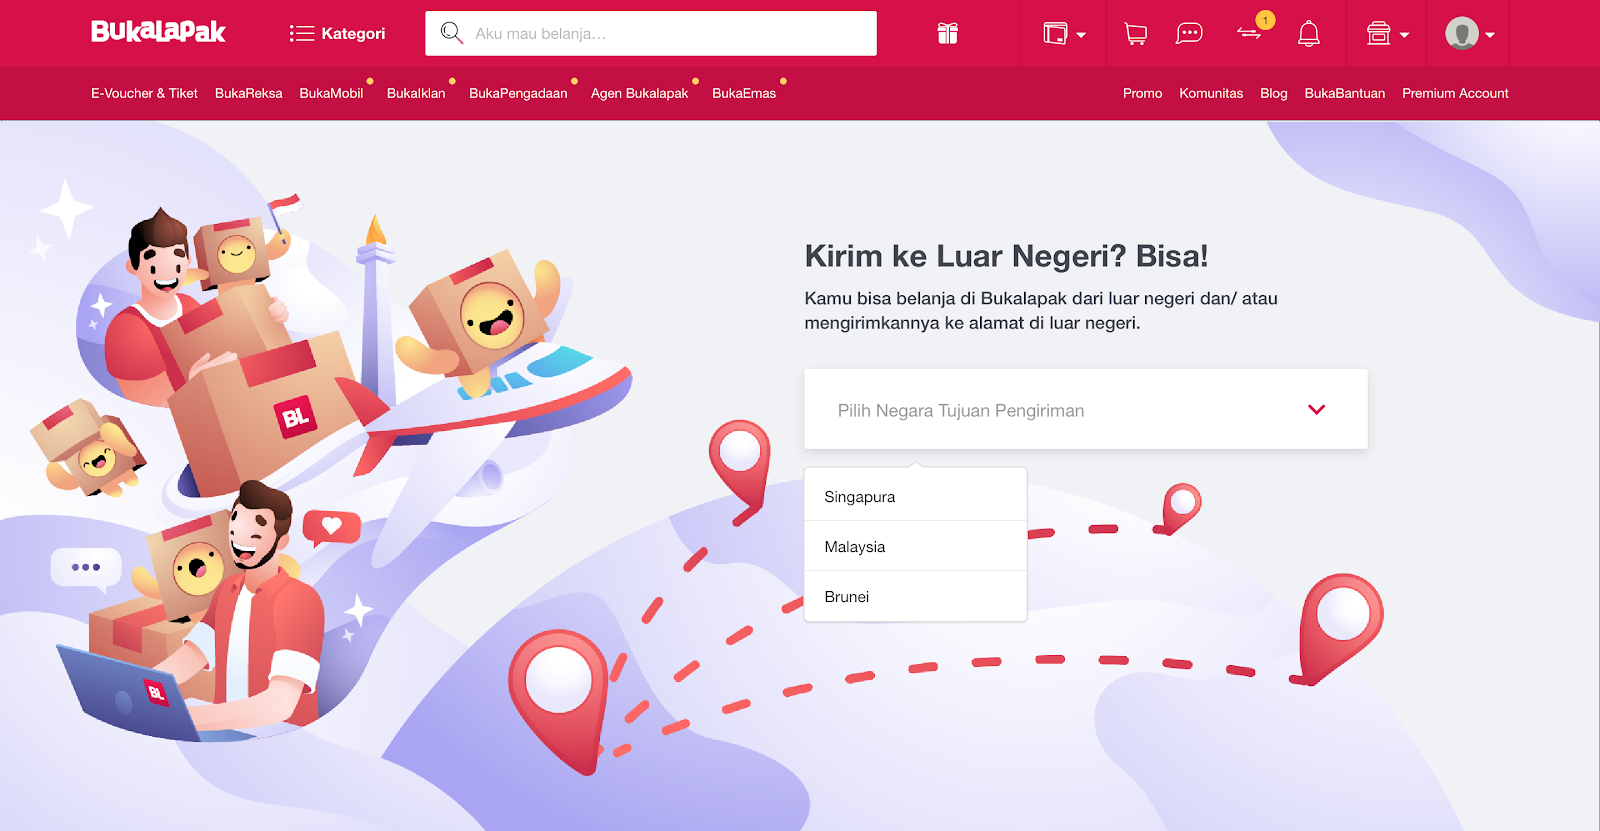 Indonesia’s Bukalapak takes its e-commerce services overseas through new BukaGlobal feature